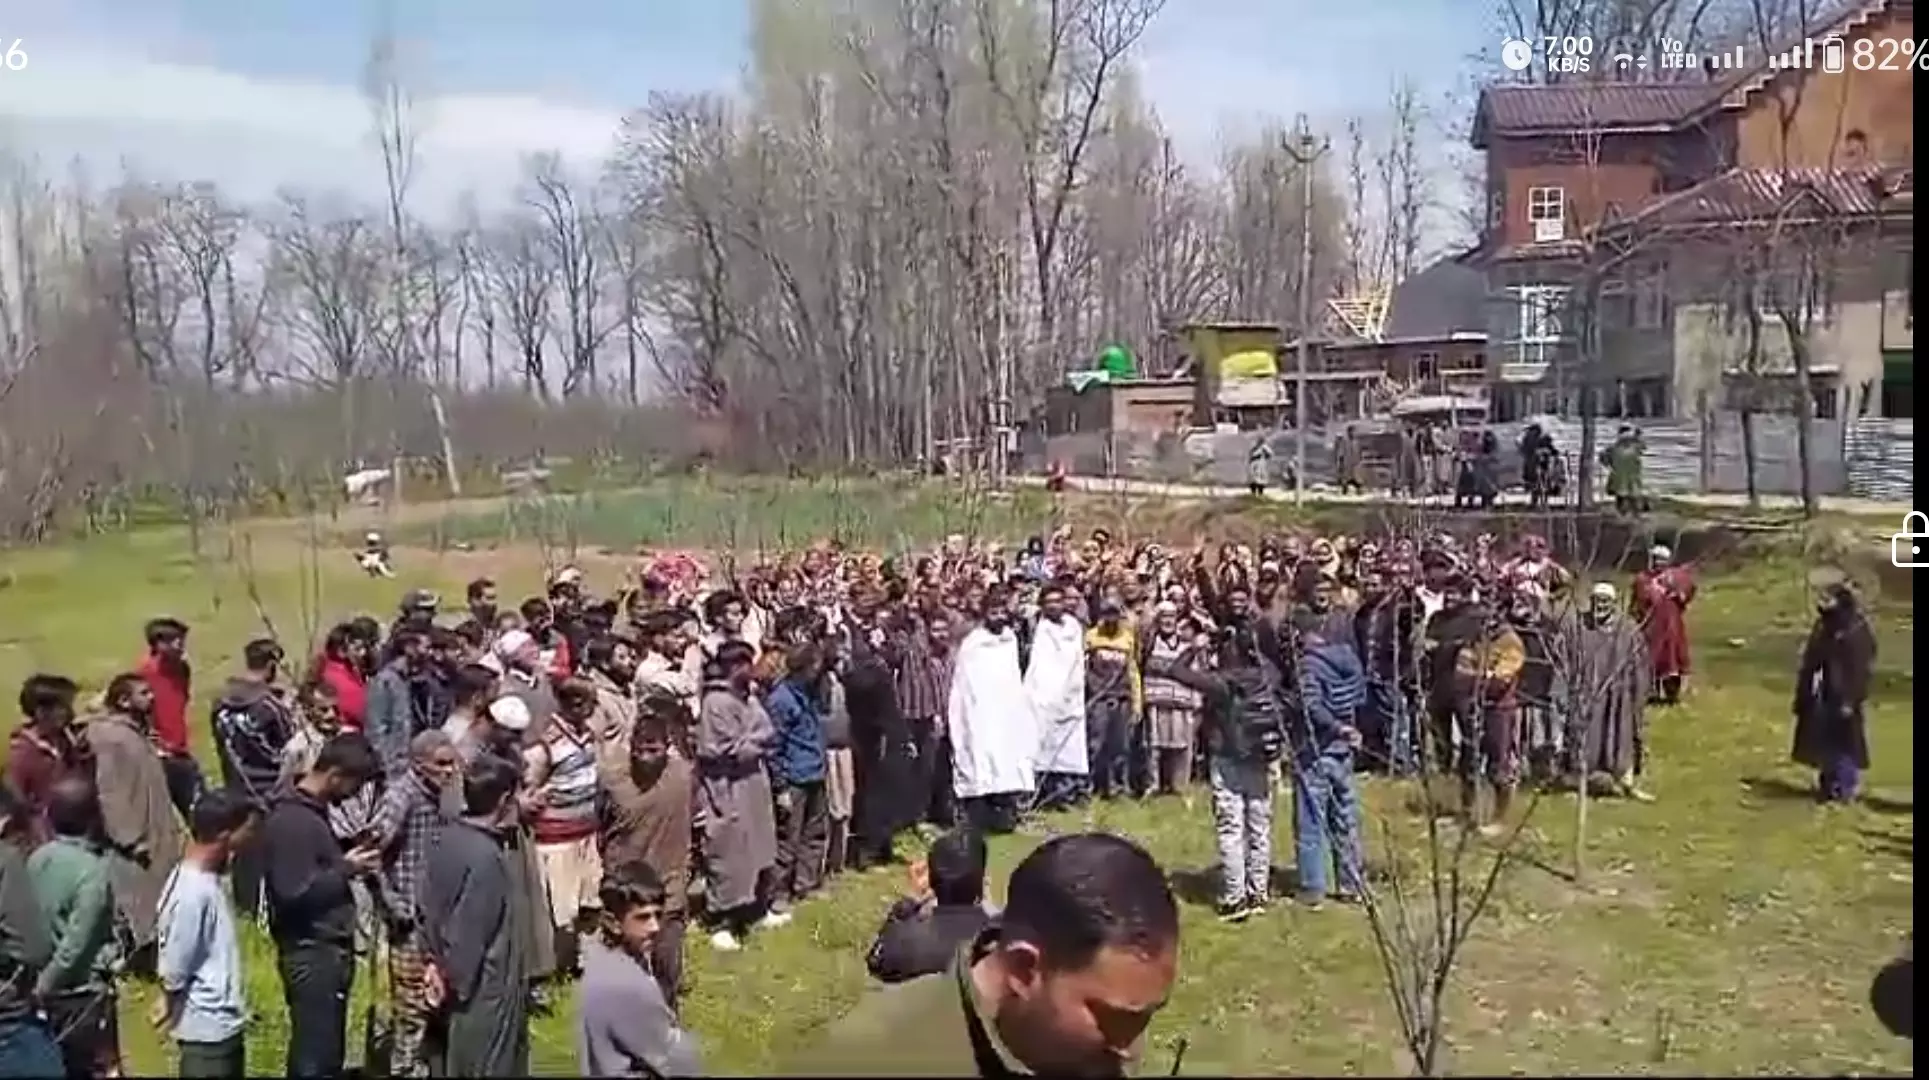 Kashmir Orchardists Up in Arms Against ‘Forcible’ Takeover of Their Lands